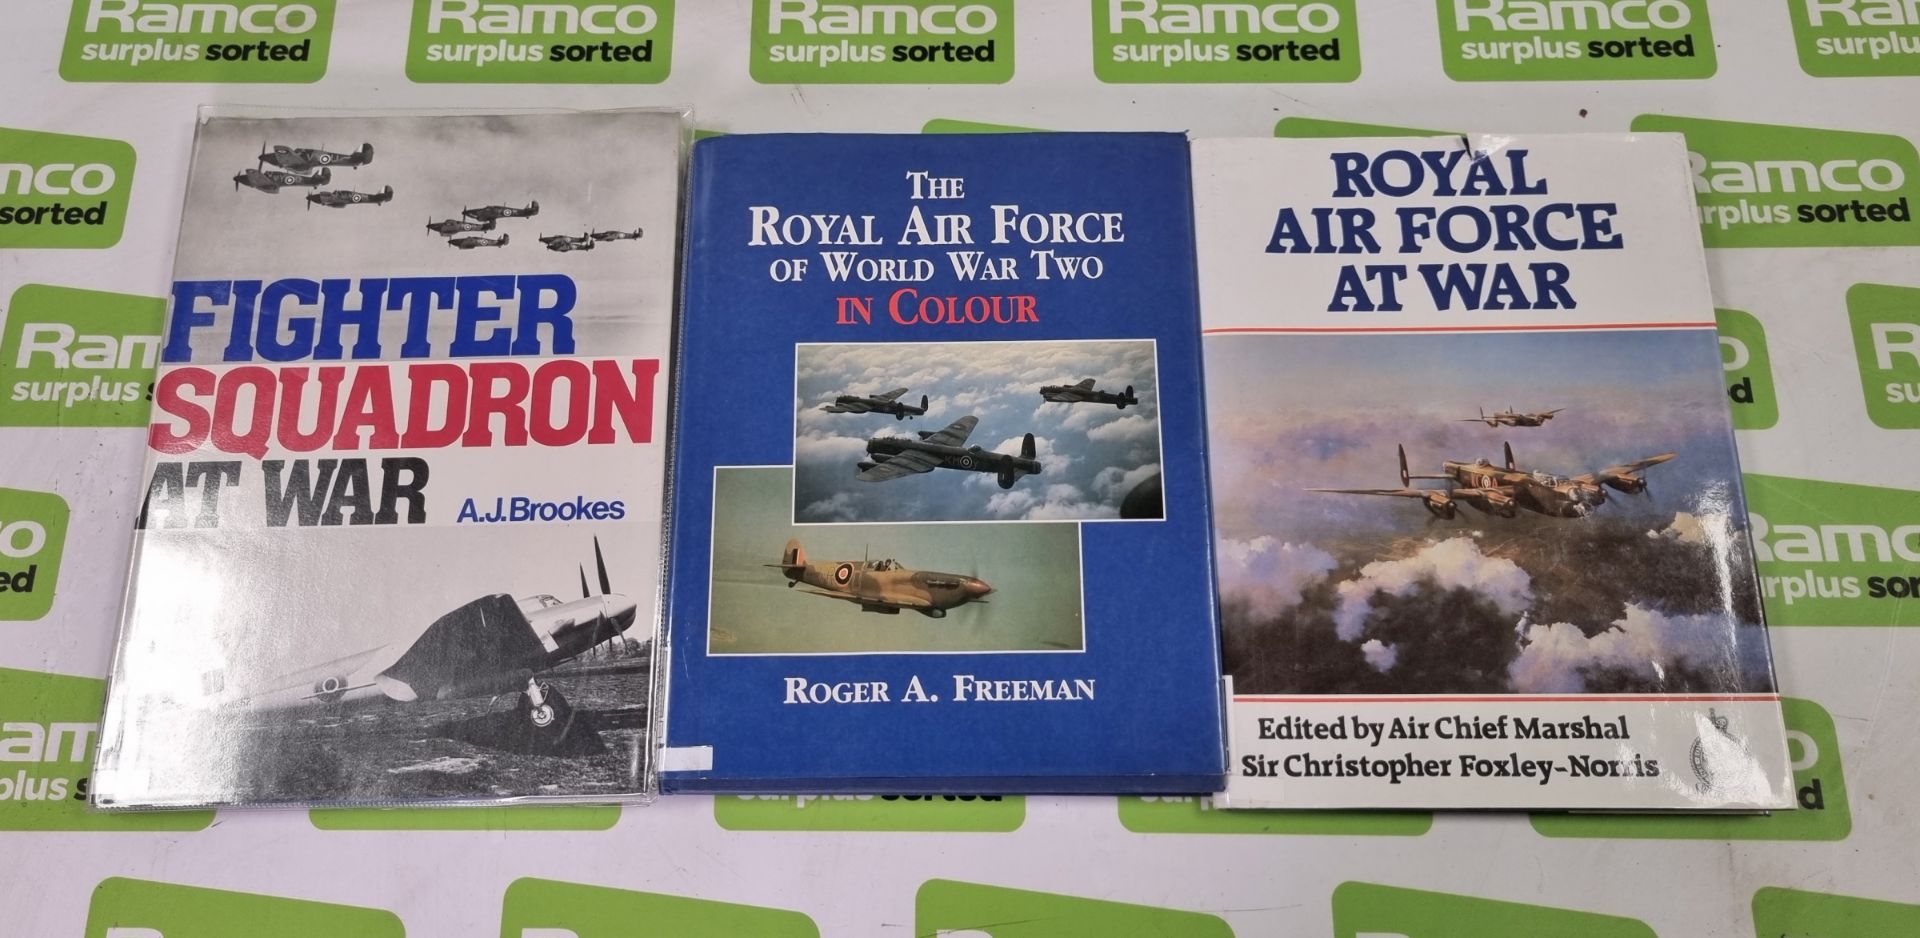 Royal Air Force At War by Air Chief Marshal Sir Christopher Foxley-Norris - UK 1983, The Royal Air - Image 2 of 16